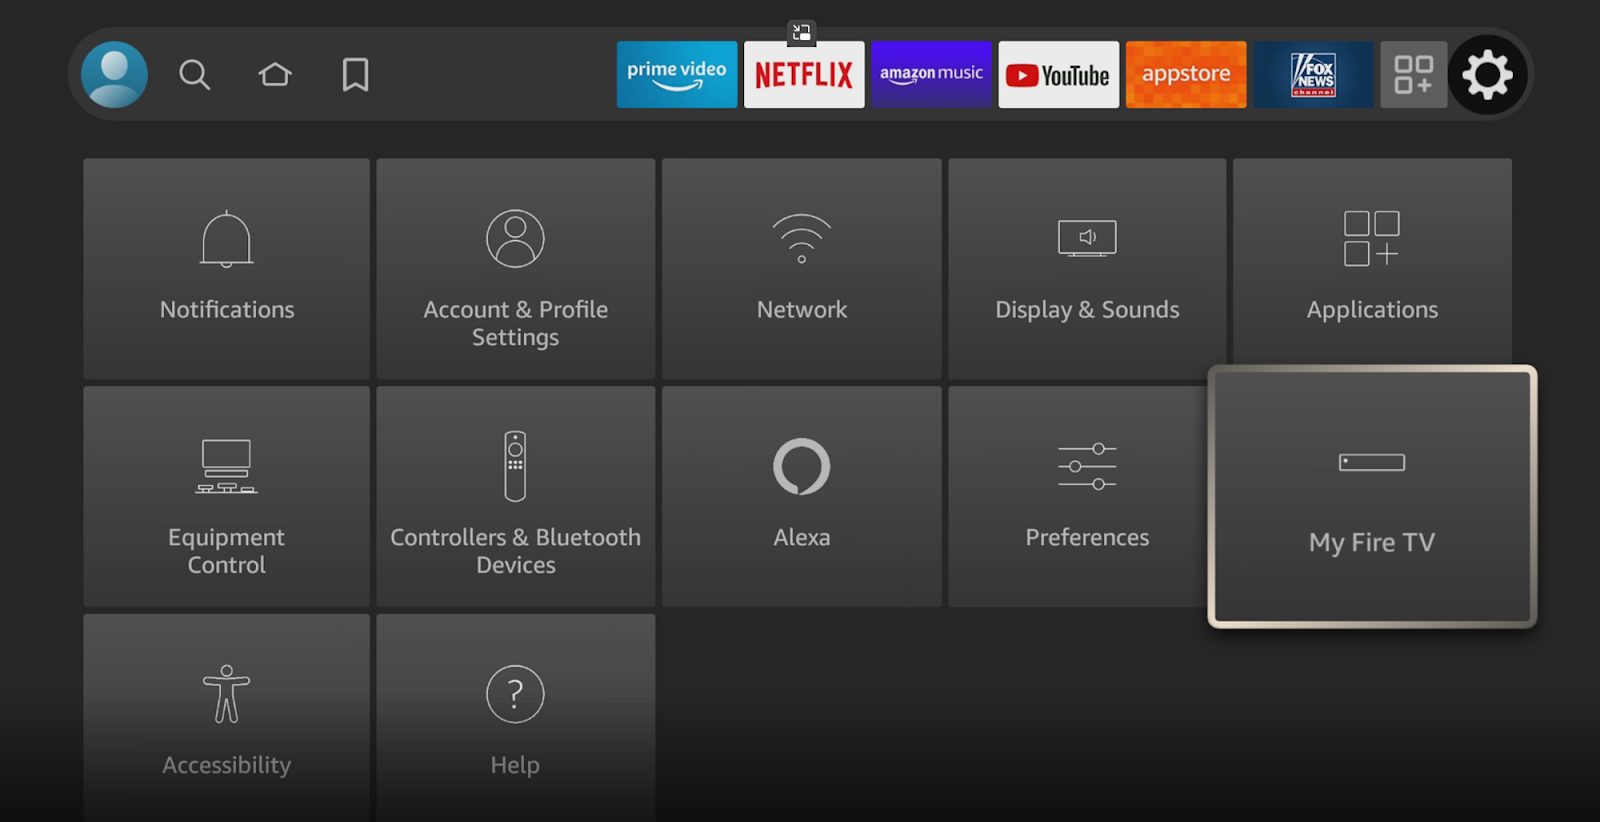 How to access My Fire Tv on Amazon Fire Stick